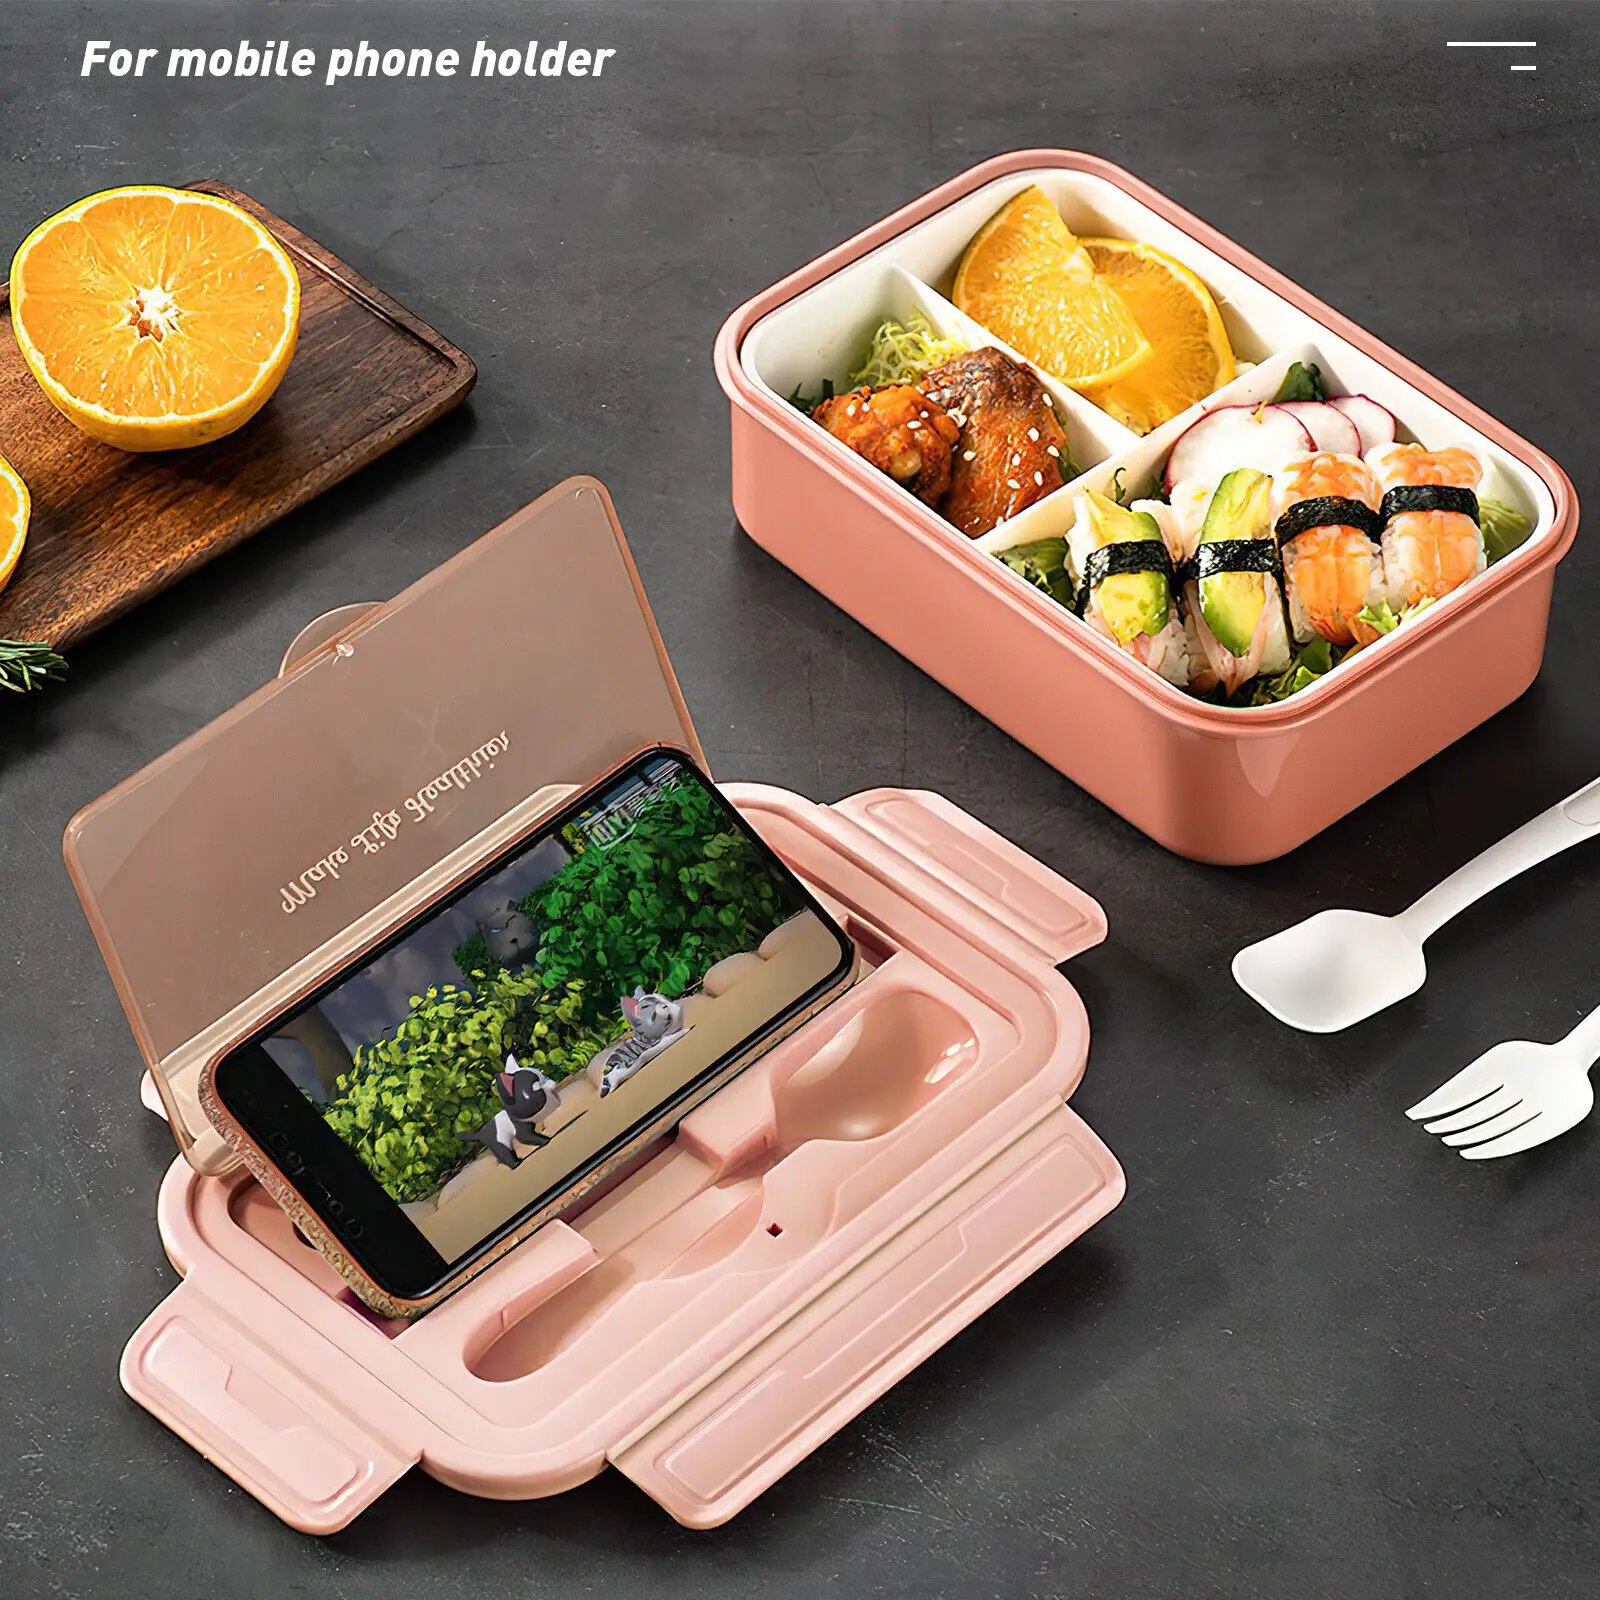 https://ae01.alicdn.com/kf/S3a80e75b979e4679a1f6d5aa4ec9dd43v/Lunch-Box-For-Kids-Adults-Food-Container-Picnic-Bento-Storage-Box-4-Compartments-1400ml-Leakproof-Bento.jpg